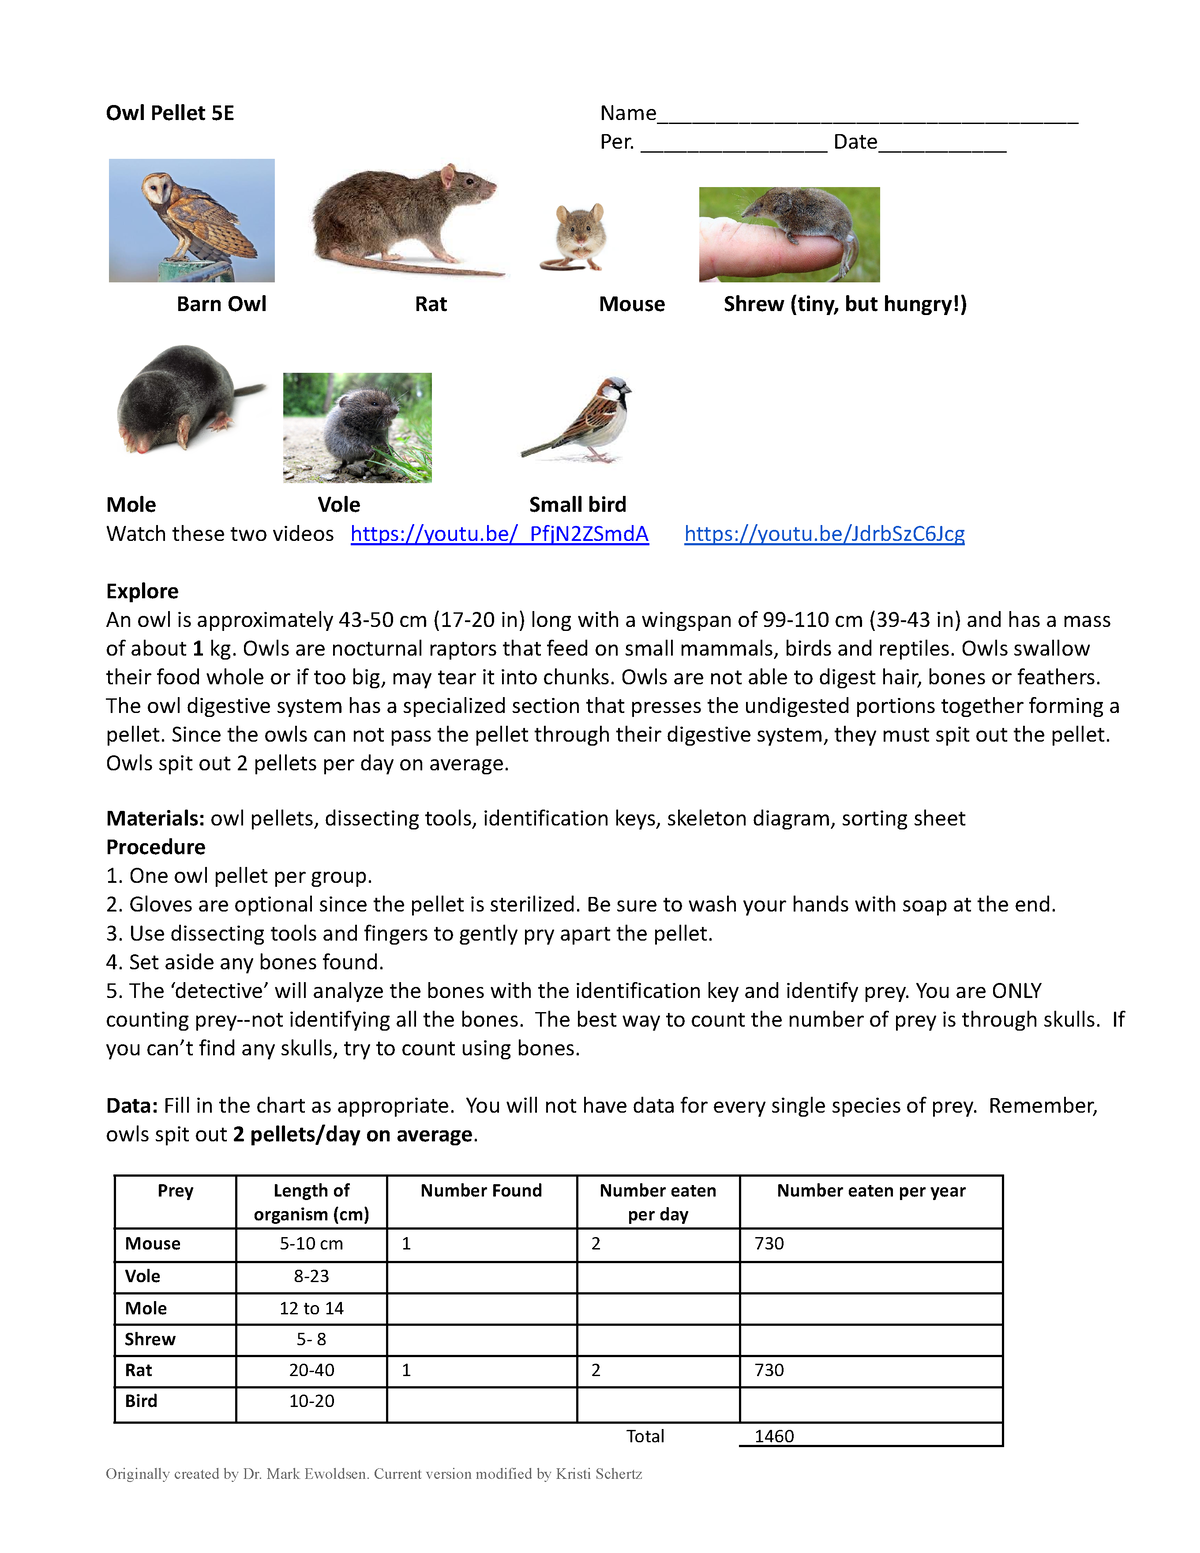 Owl Pellet Dissection & Prey Identification Visual Learning Guide